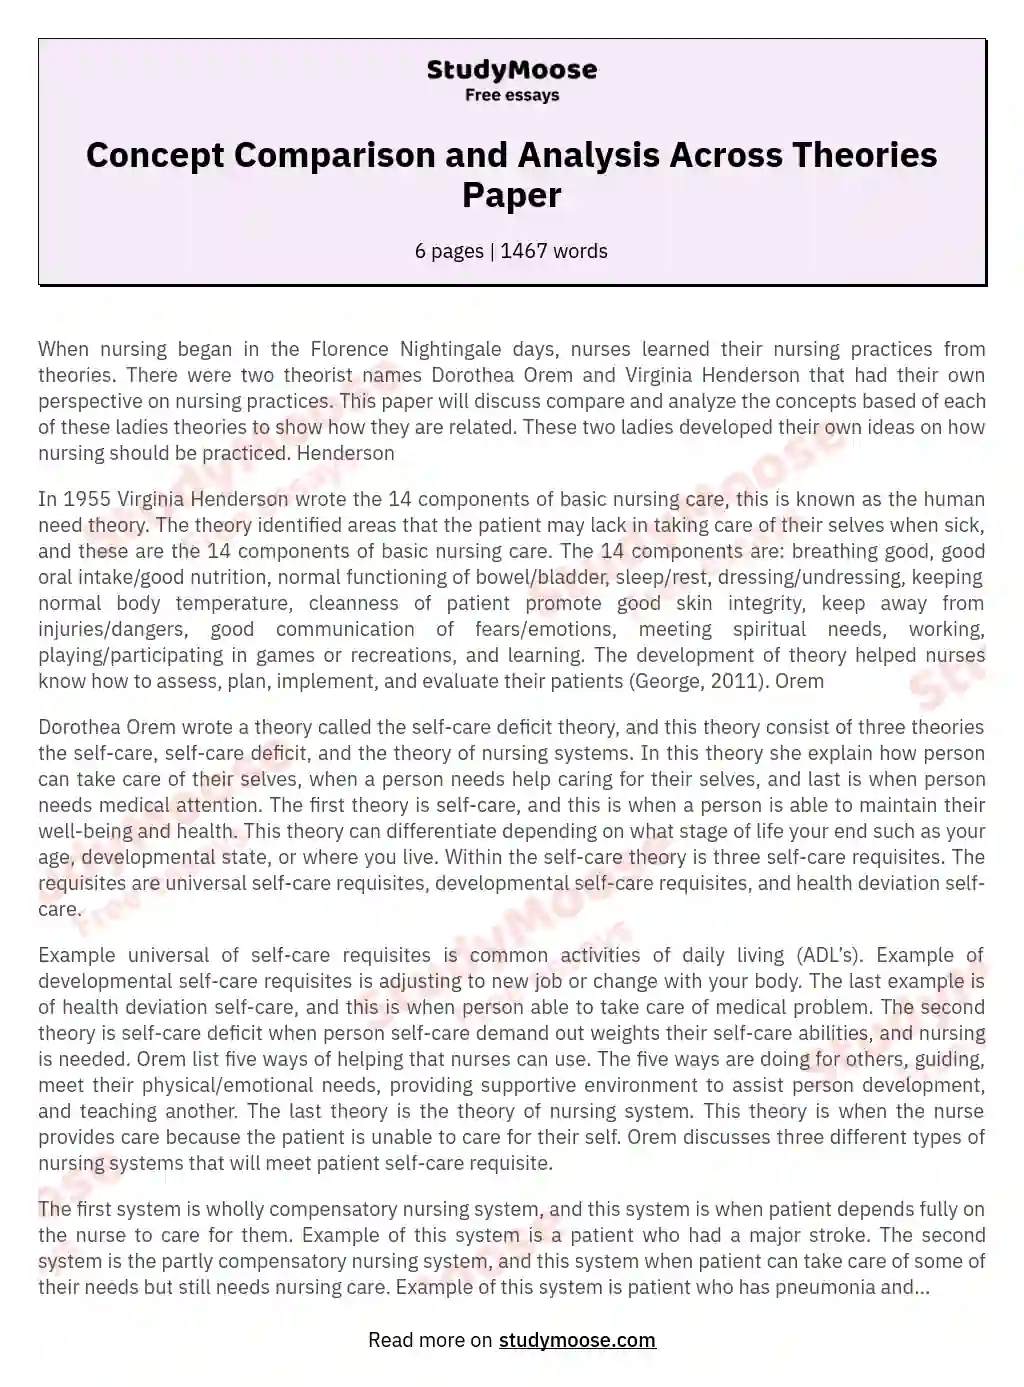 Concept Comparison and Analysis Across Theories Paper essay